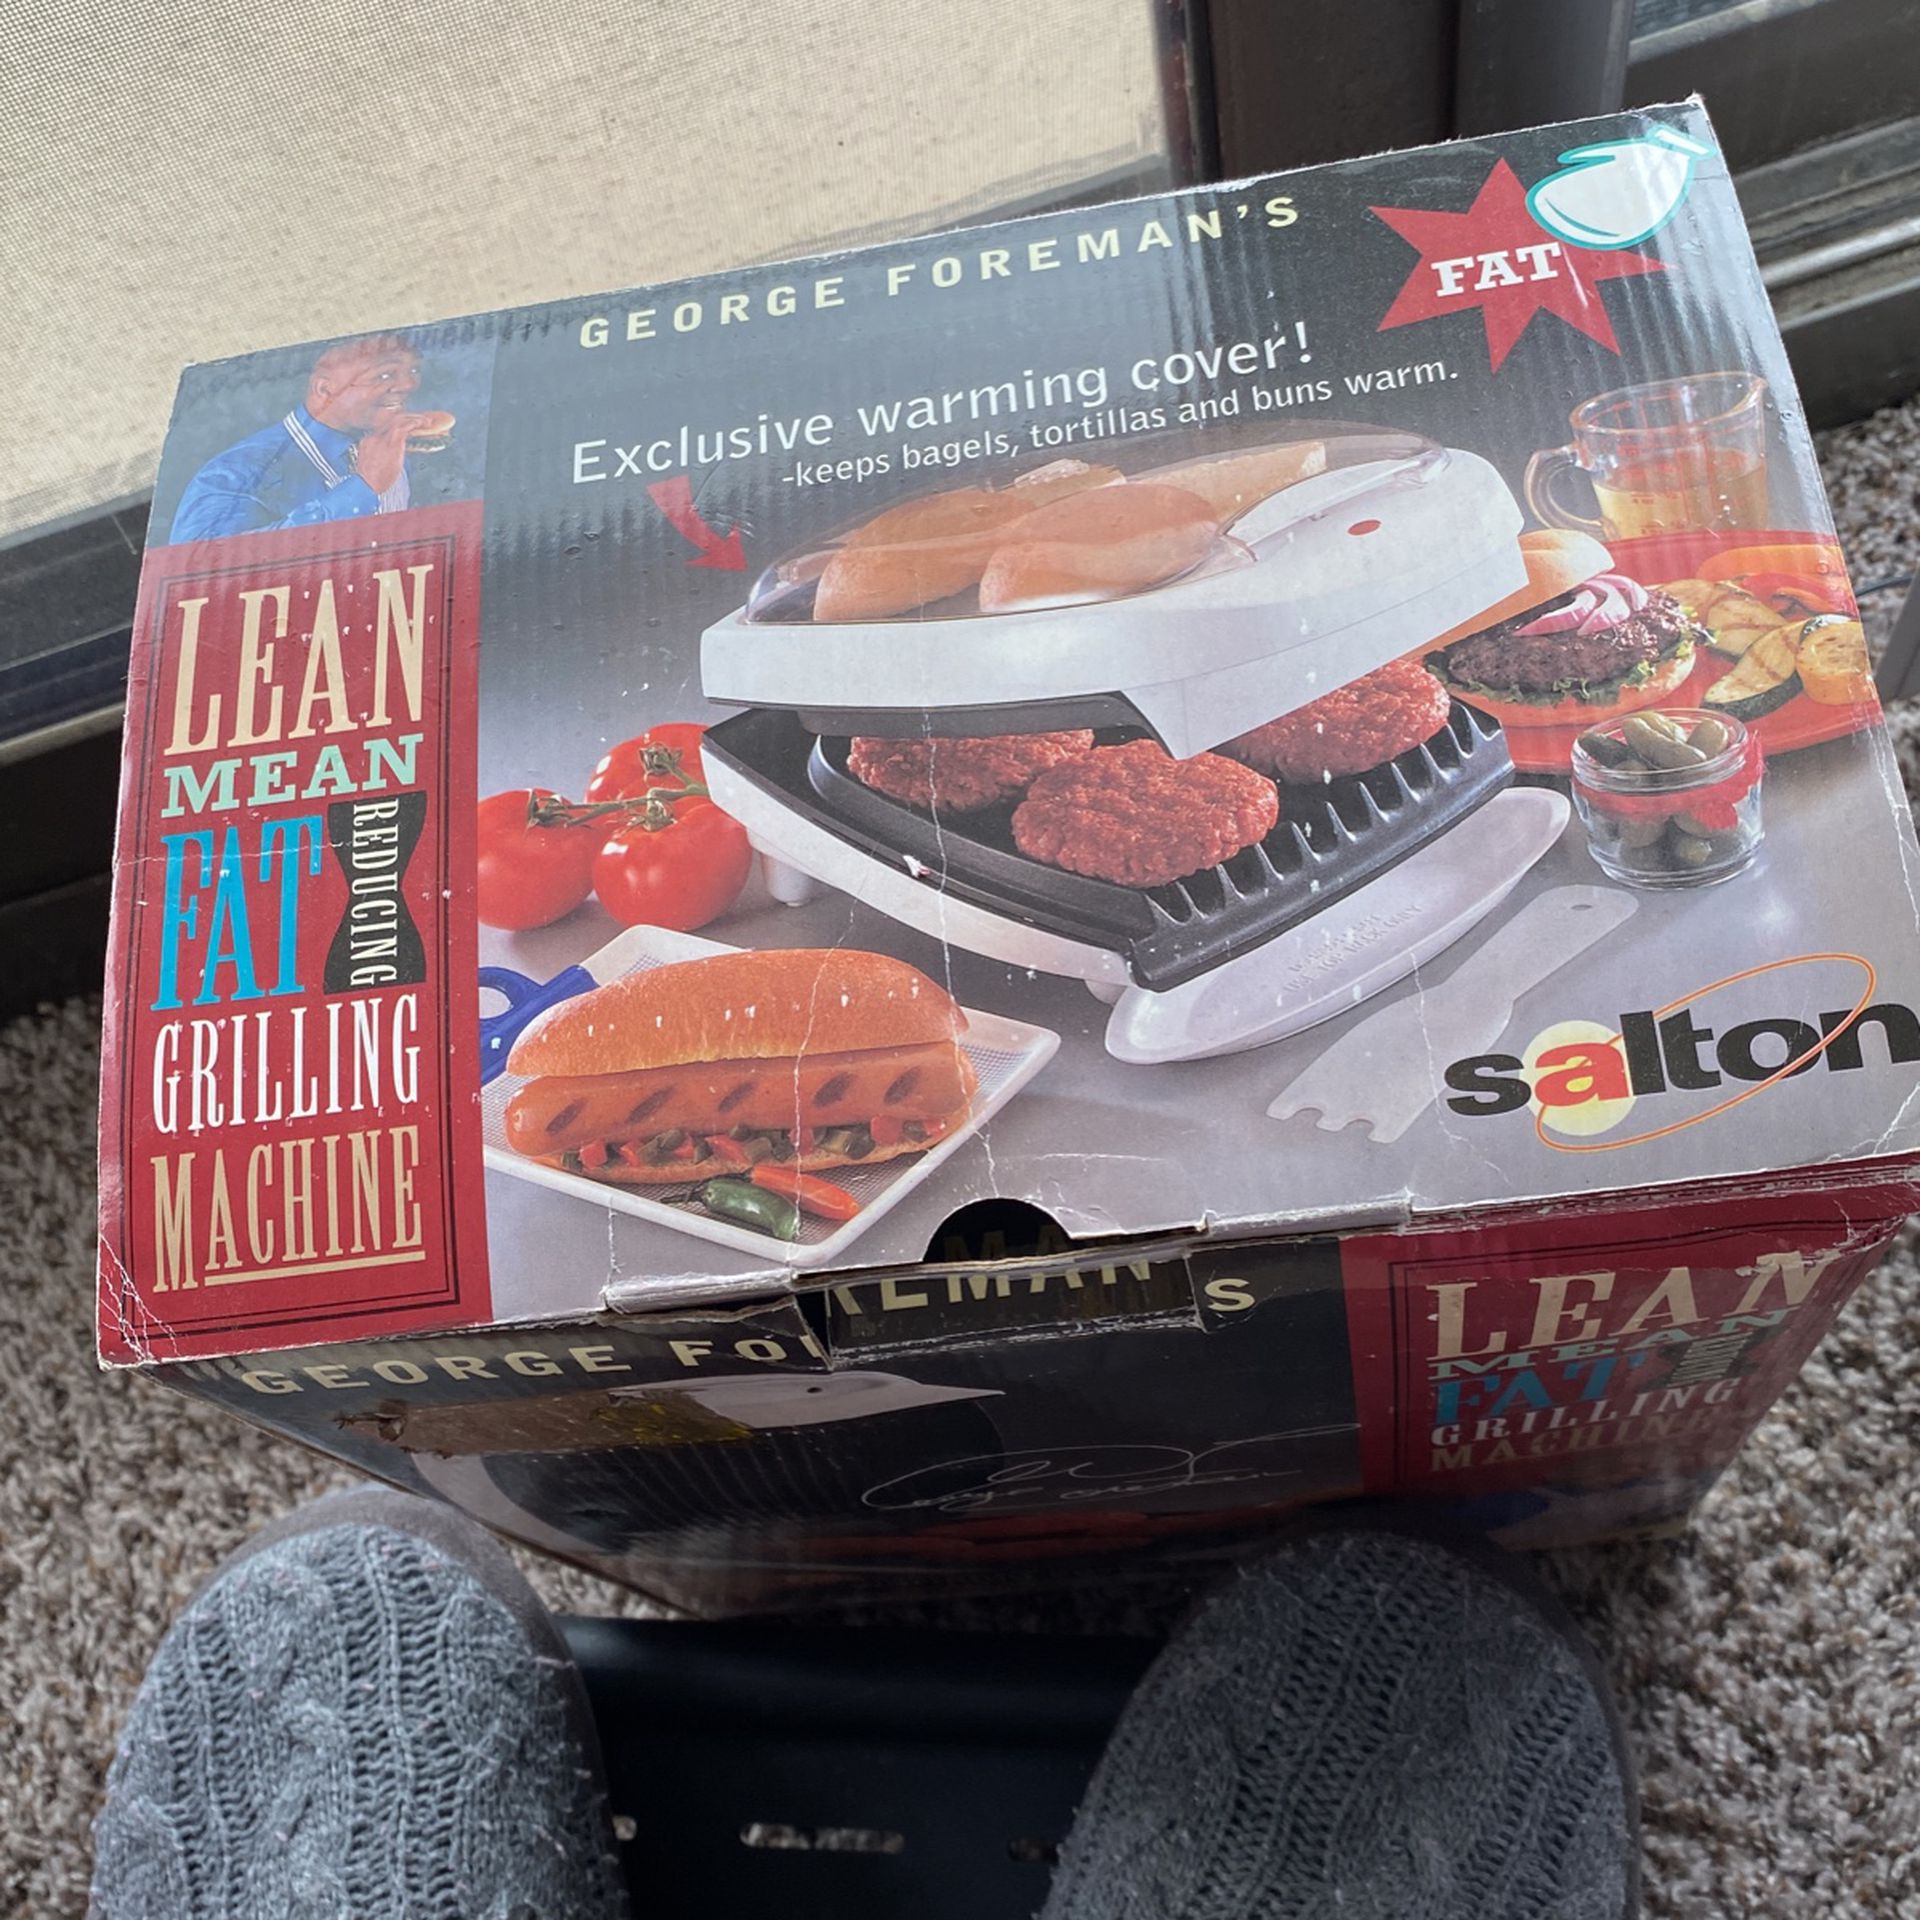 A New George foreman's Grilling Machine